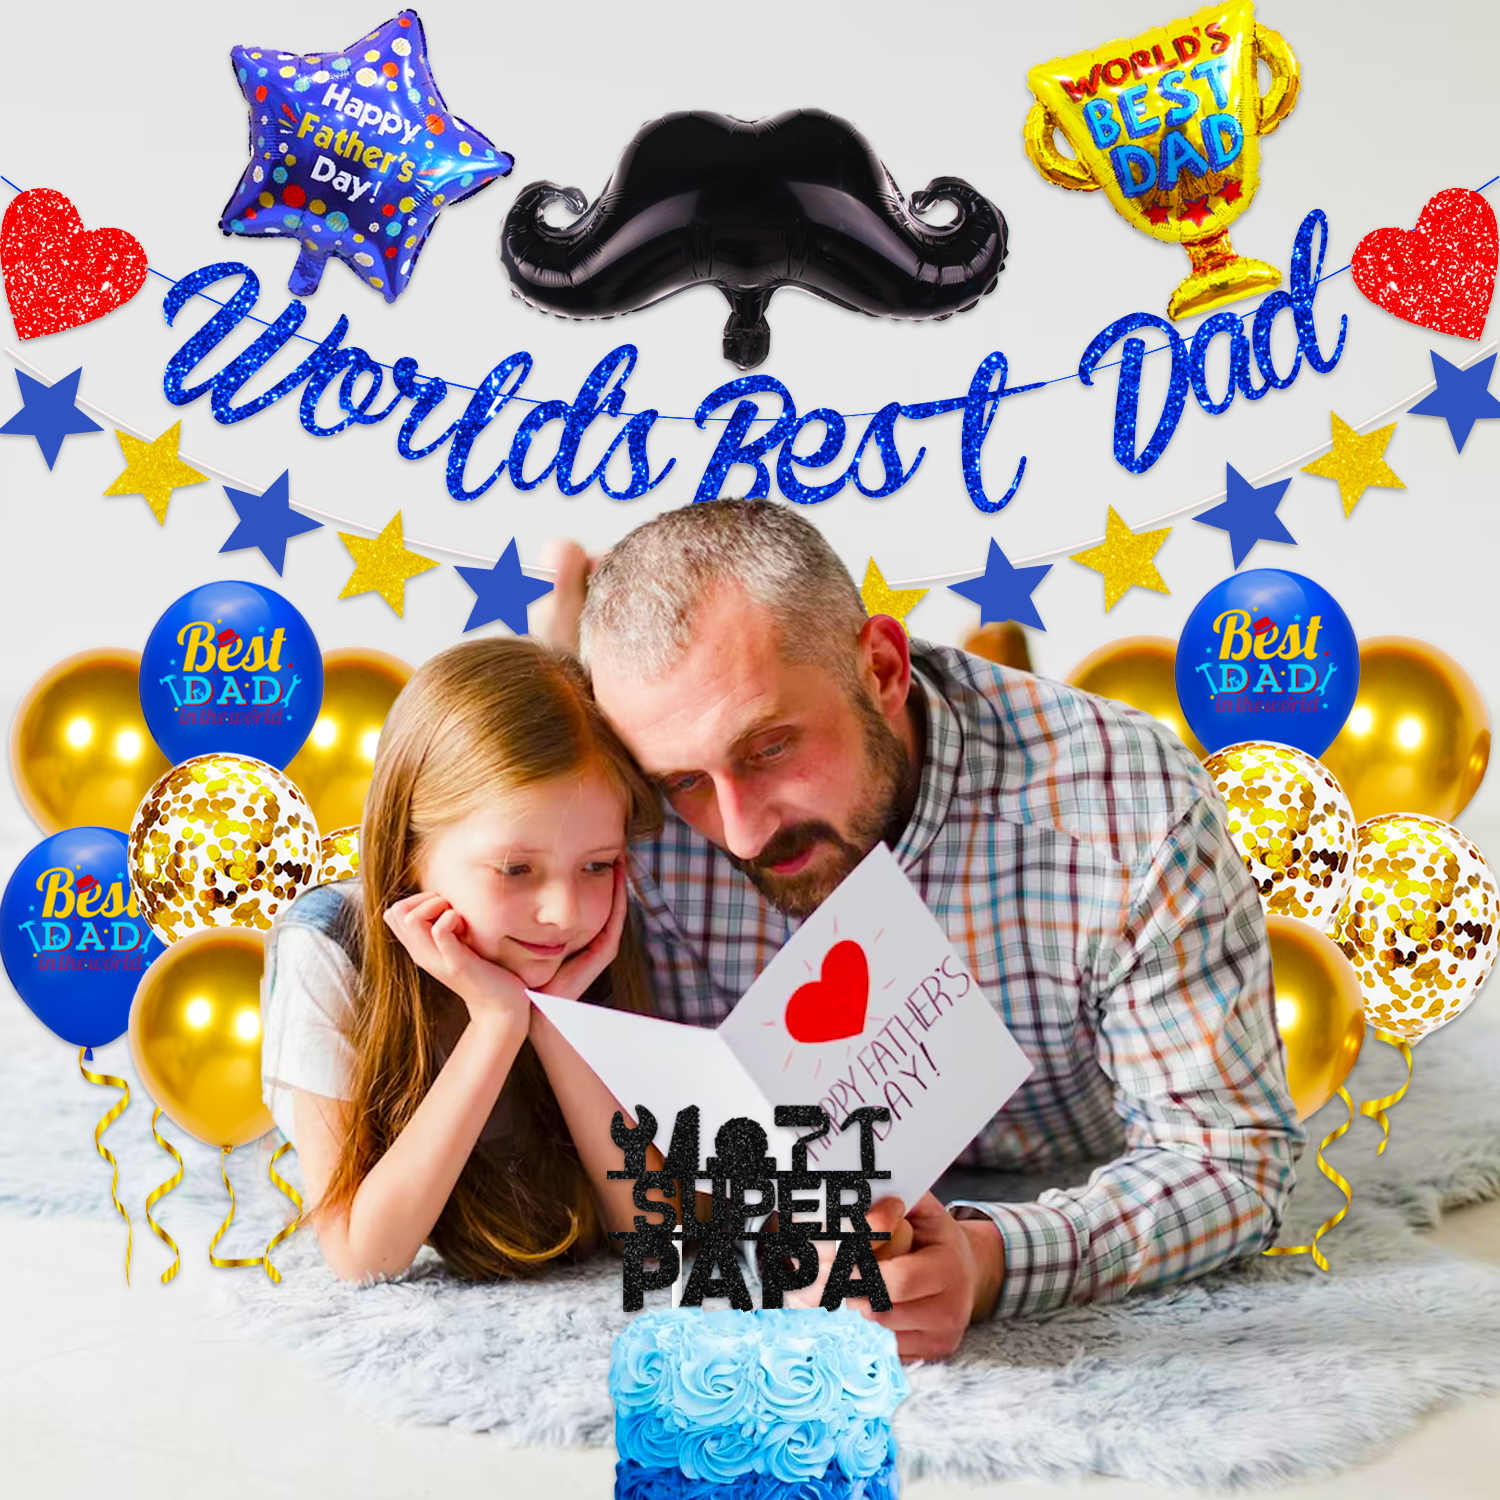 Happy Fathers Day Decorations - Super Dad Decorations for Father Birthday Party - World's Best Dad Banner and Best Dad Balloon - Super Dad Party Supplies for Home - image 4 of 6